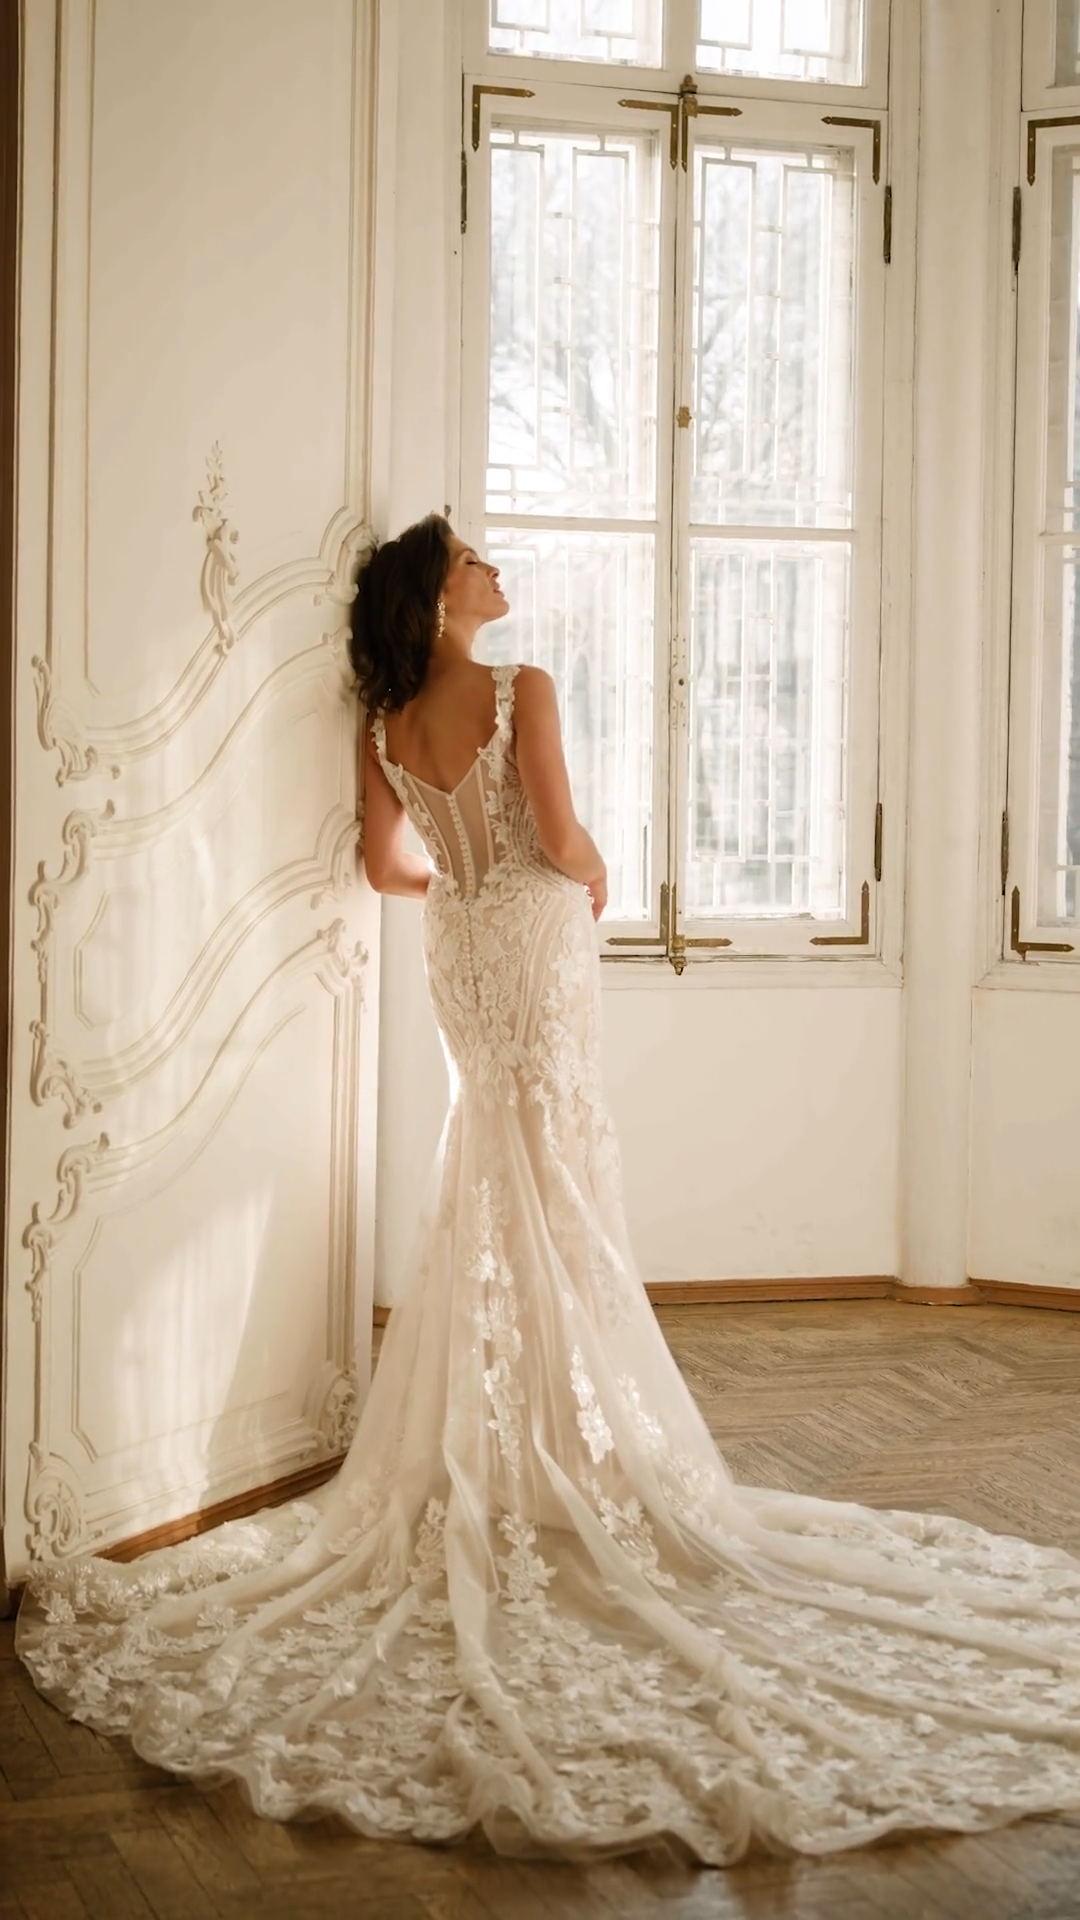 Stunning Deep V-Neck and Illusion V-Back Mermaid Gown with Lace Trim Moonlight Couture H1507